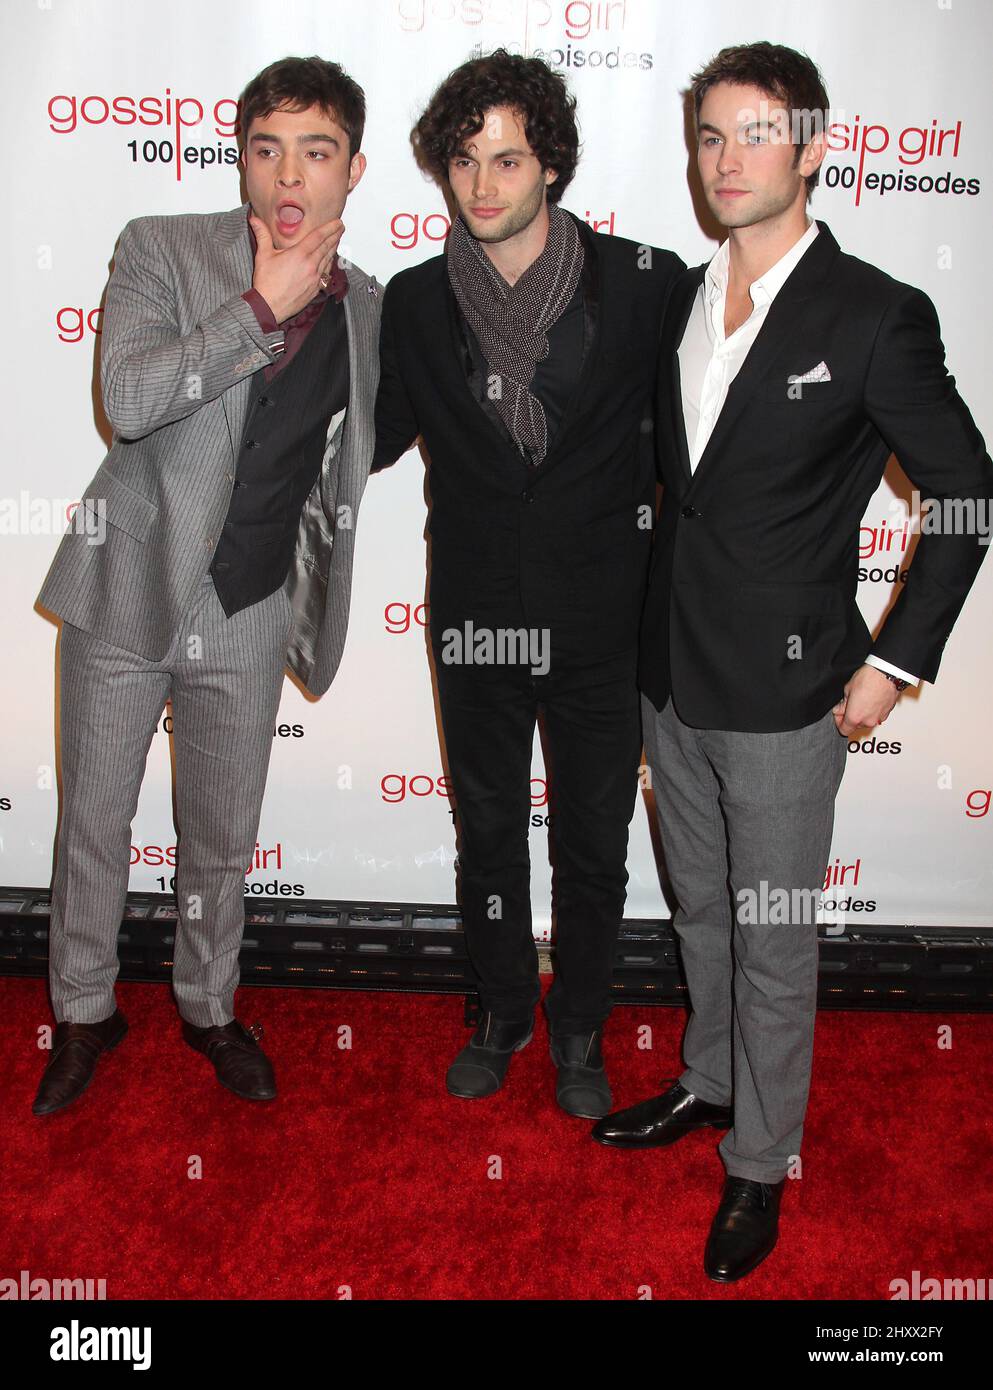 Penn Badgley, Ed Westwick and Chace Crawford at the 'Gossip Girl' 100th episode celebration at Cipriani Wall Street in New York Stock Photo